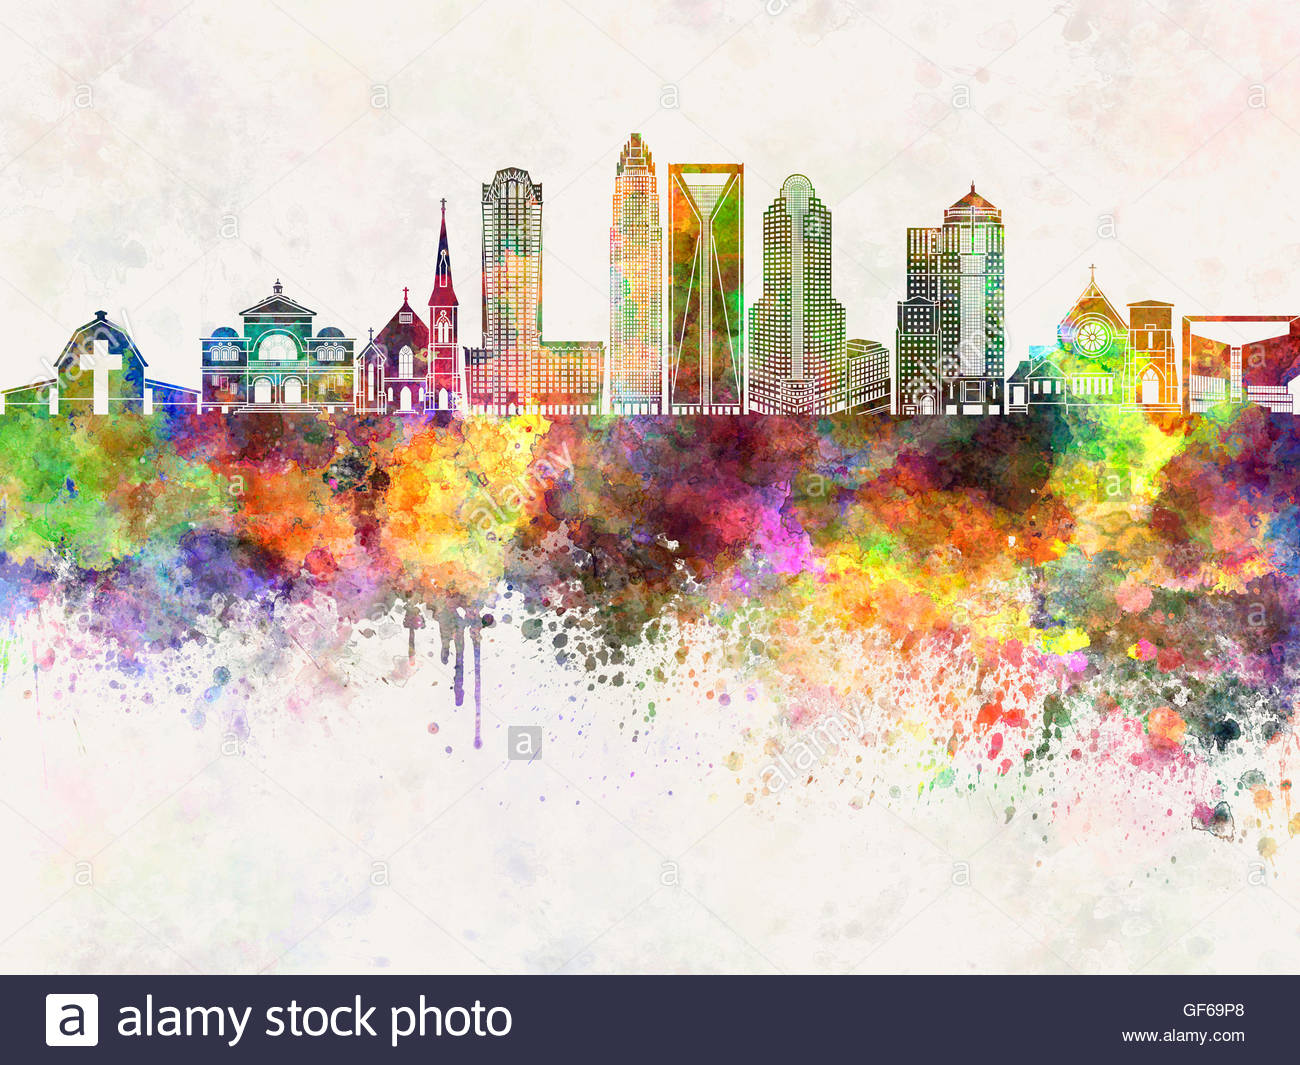 Charlotte Skyline In Watercolor Background Stock Photo